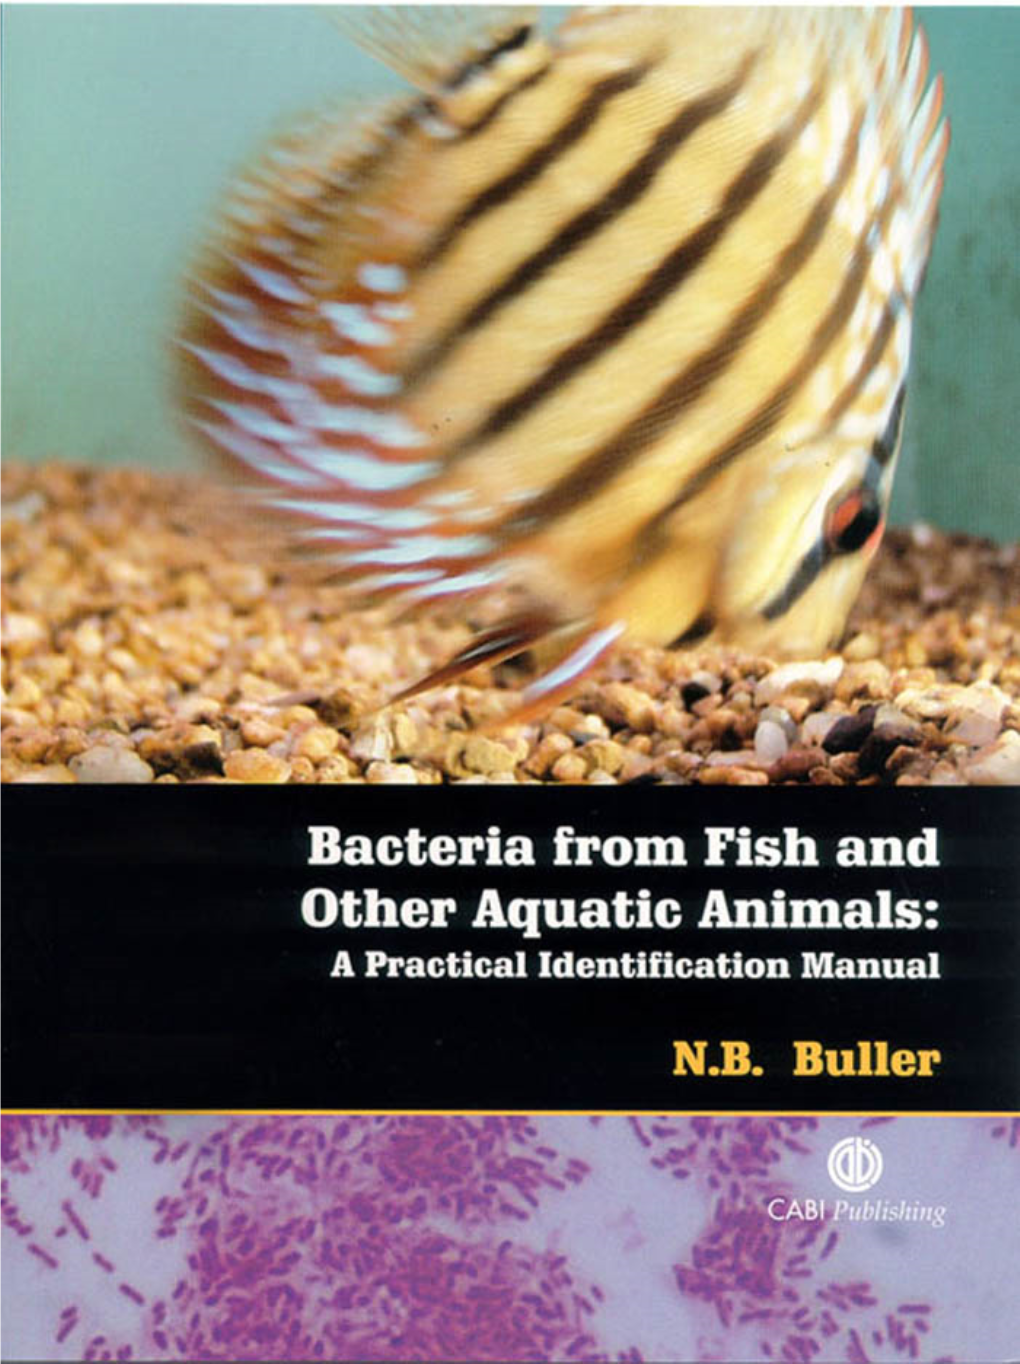 Bacteria from Fish and Other Aquatic Animals